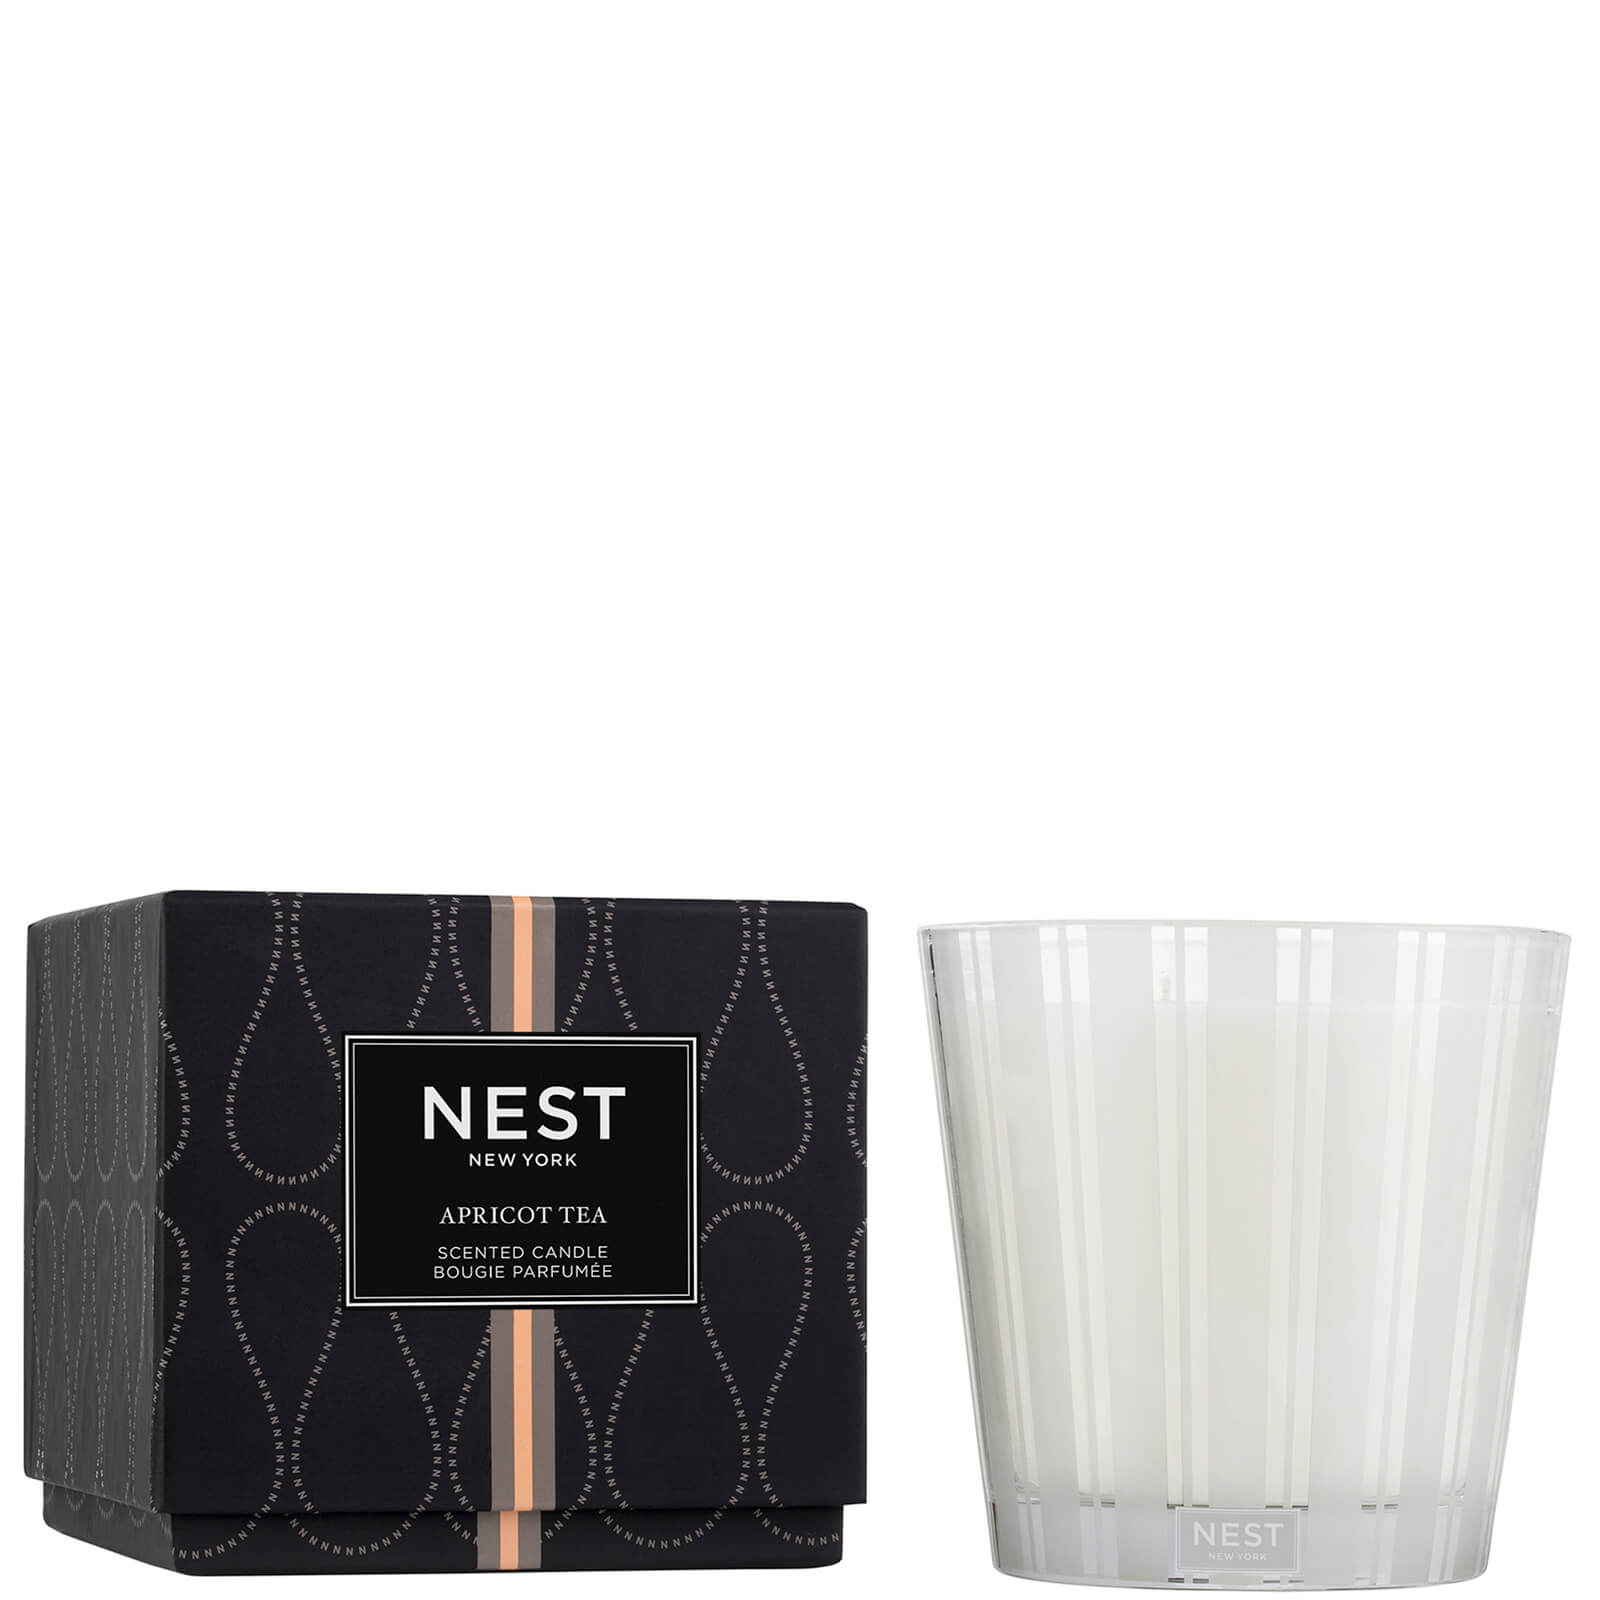 NEST NEW YORK APRICOT TEA 3-WICK CANDLE 600G